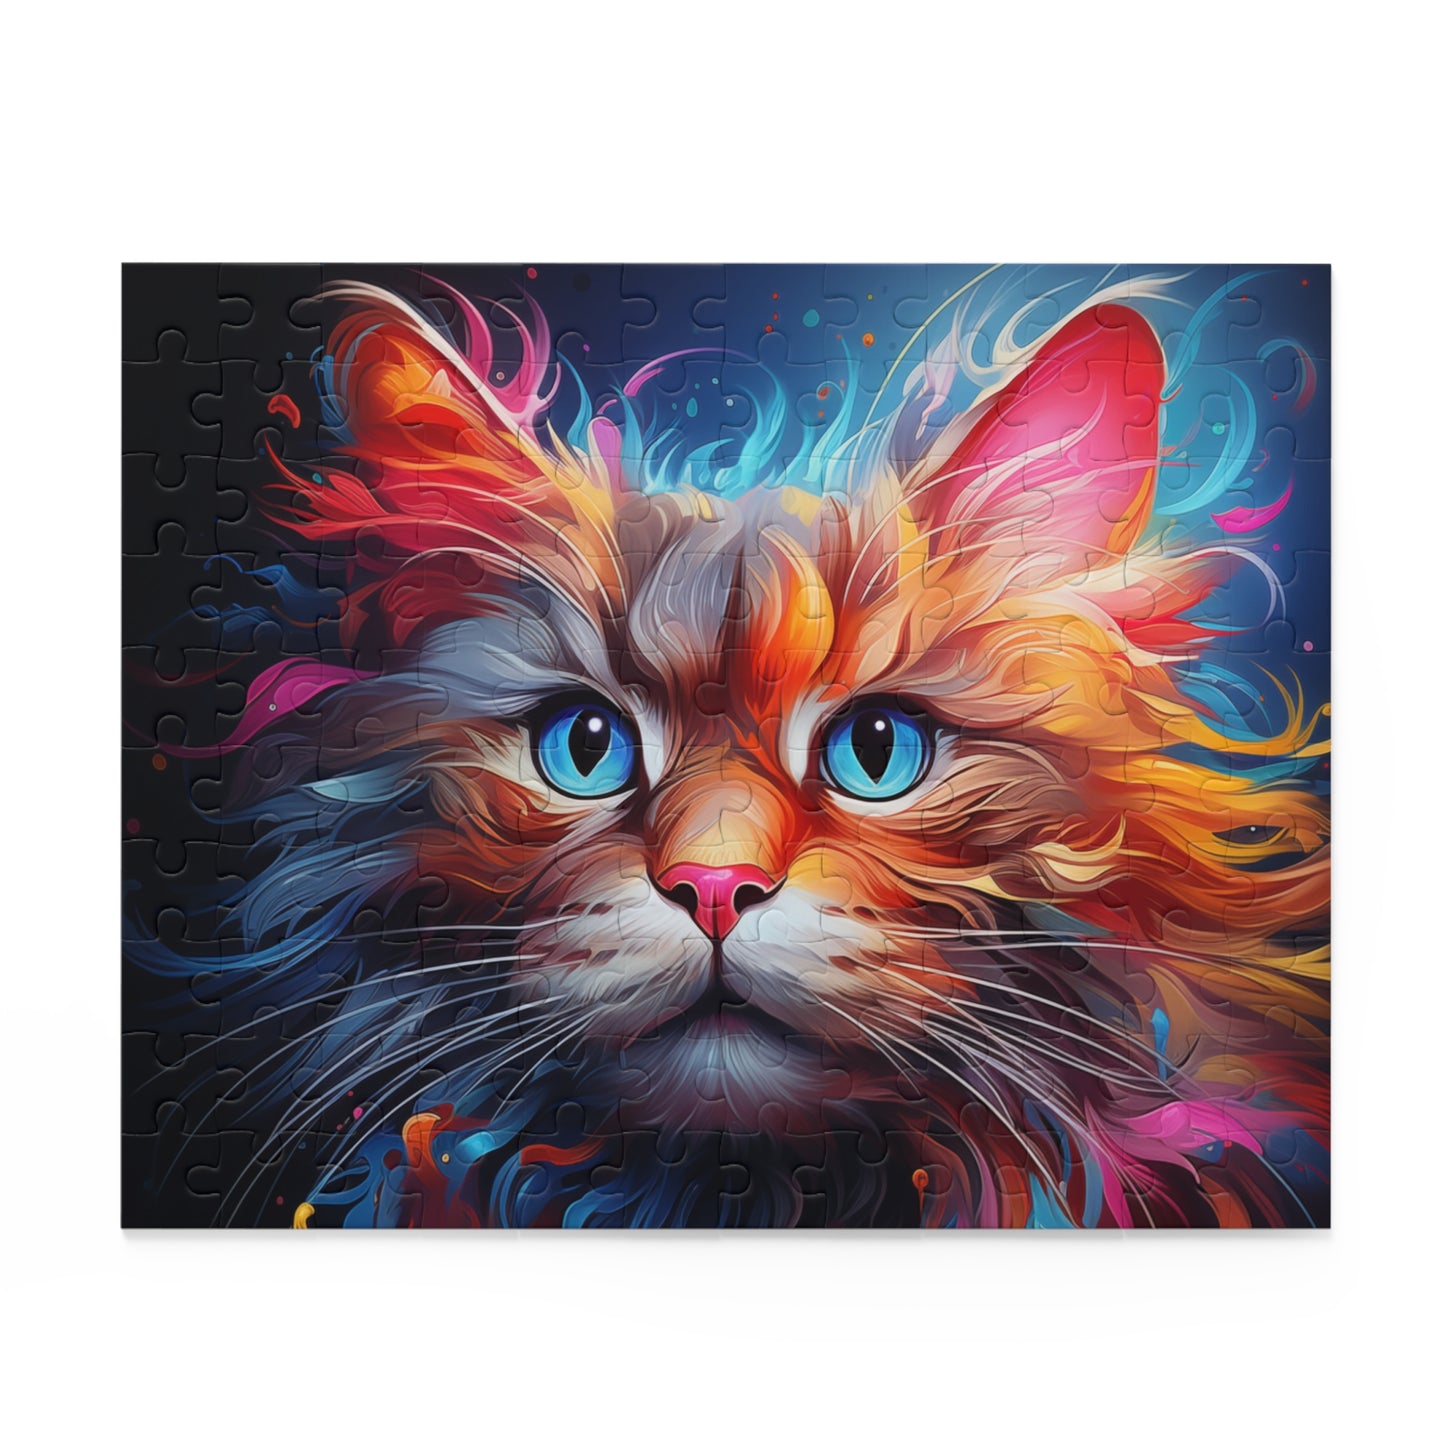 Abstract Cat Jigsaw Puzzle Adult Birthday Business Jigsaw Puzzle Gift for Him Funny Humorous Indoor Outdoor Game Gift For Her Online-2